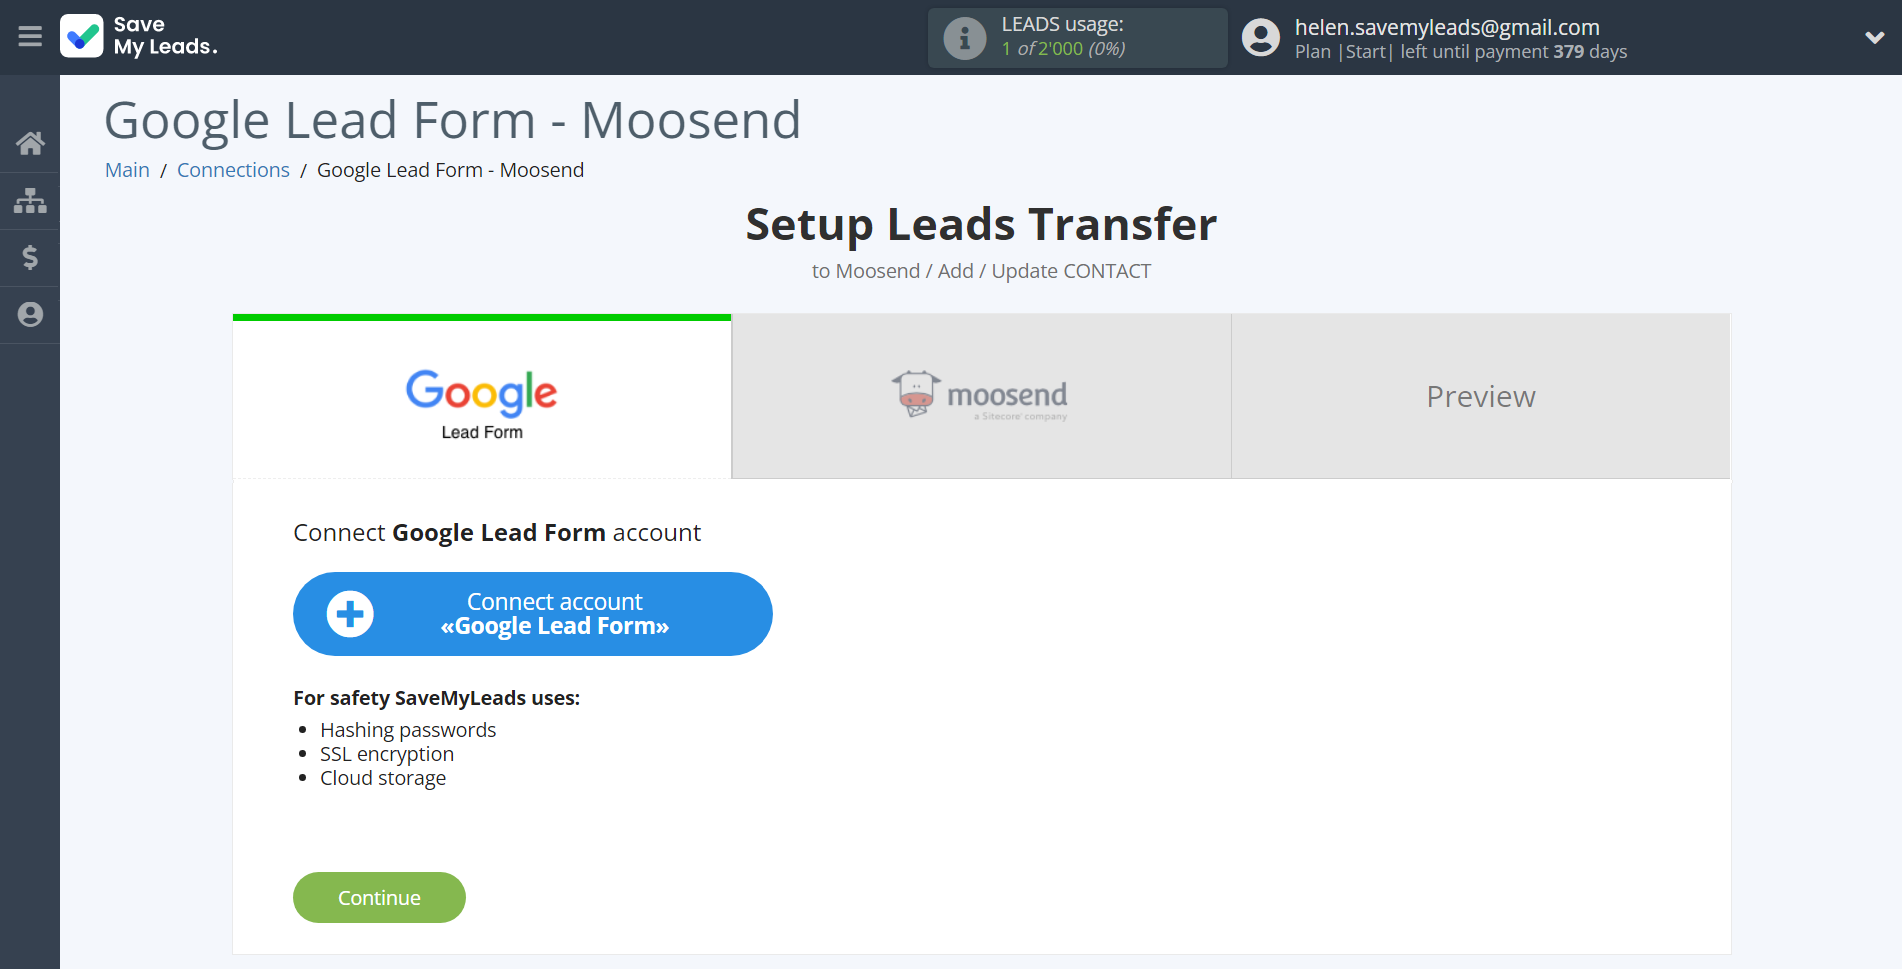 How to Connect Google Lead Form with Moosend | Data Source account